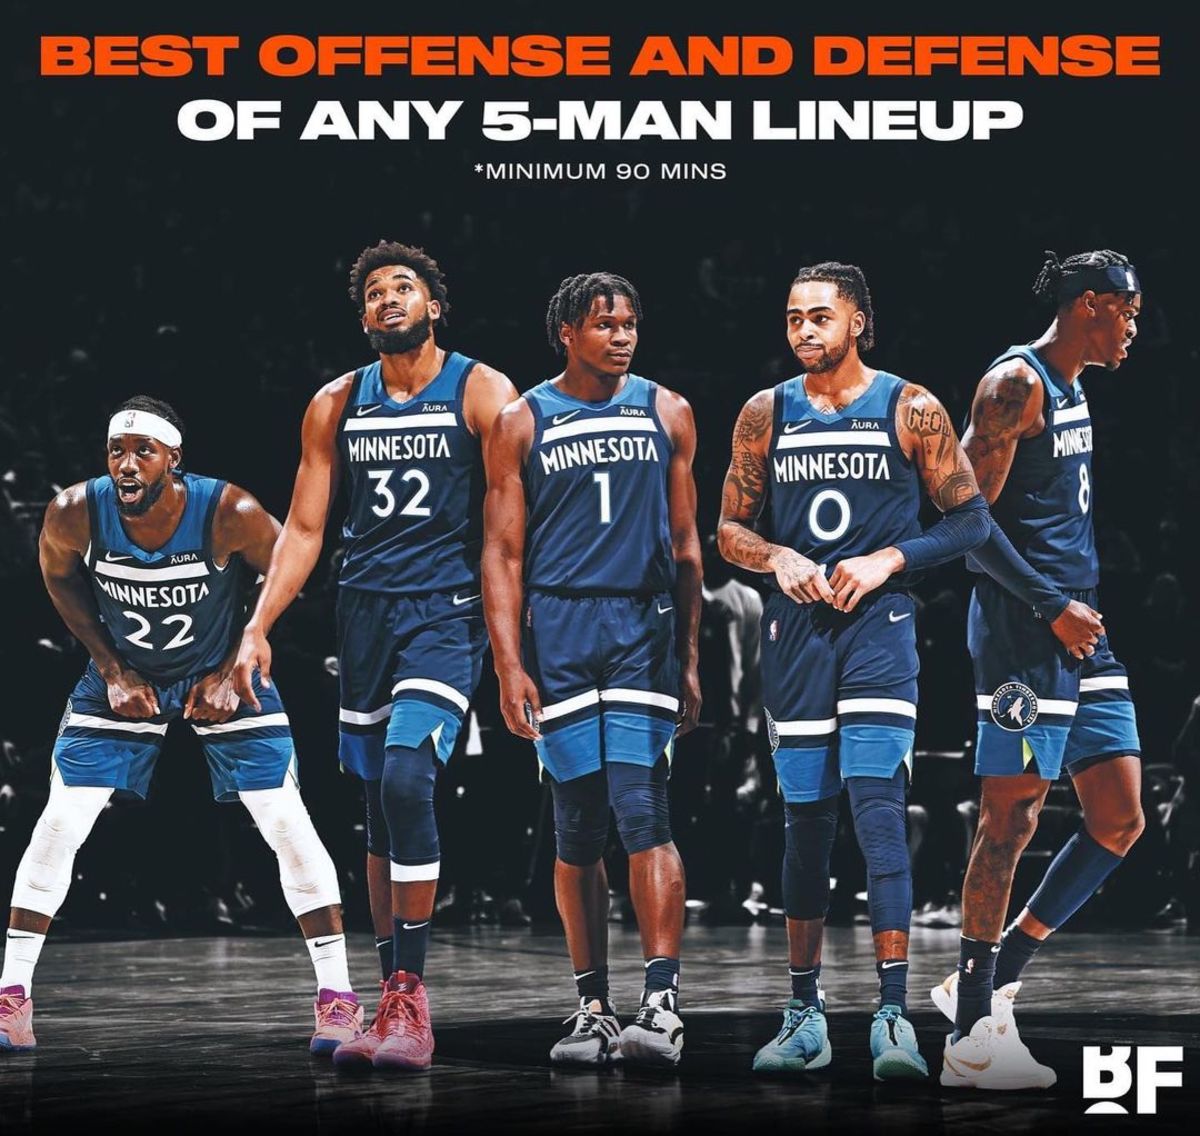 Minnesota Timberwolves Have The Best Offensive And Defensive 5-Man Lineup, And Wolves Fans Can't Believe: "I’m Both Ecstatic And In Disbelief"